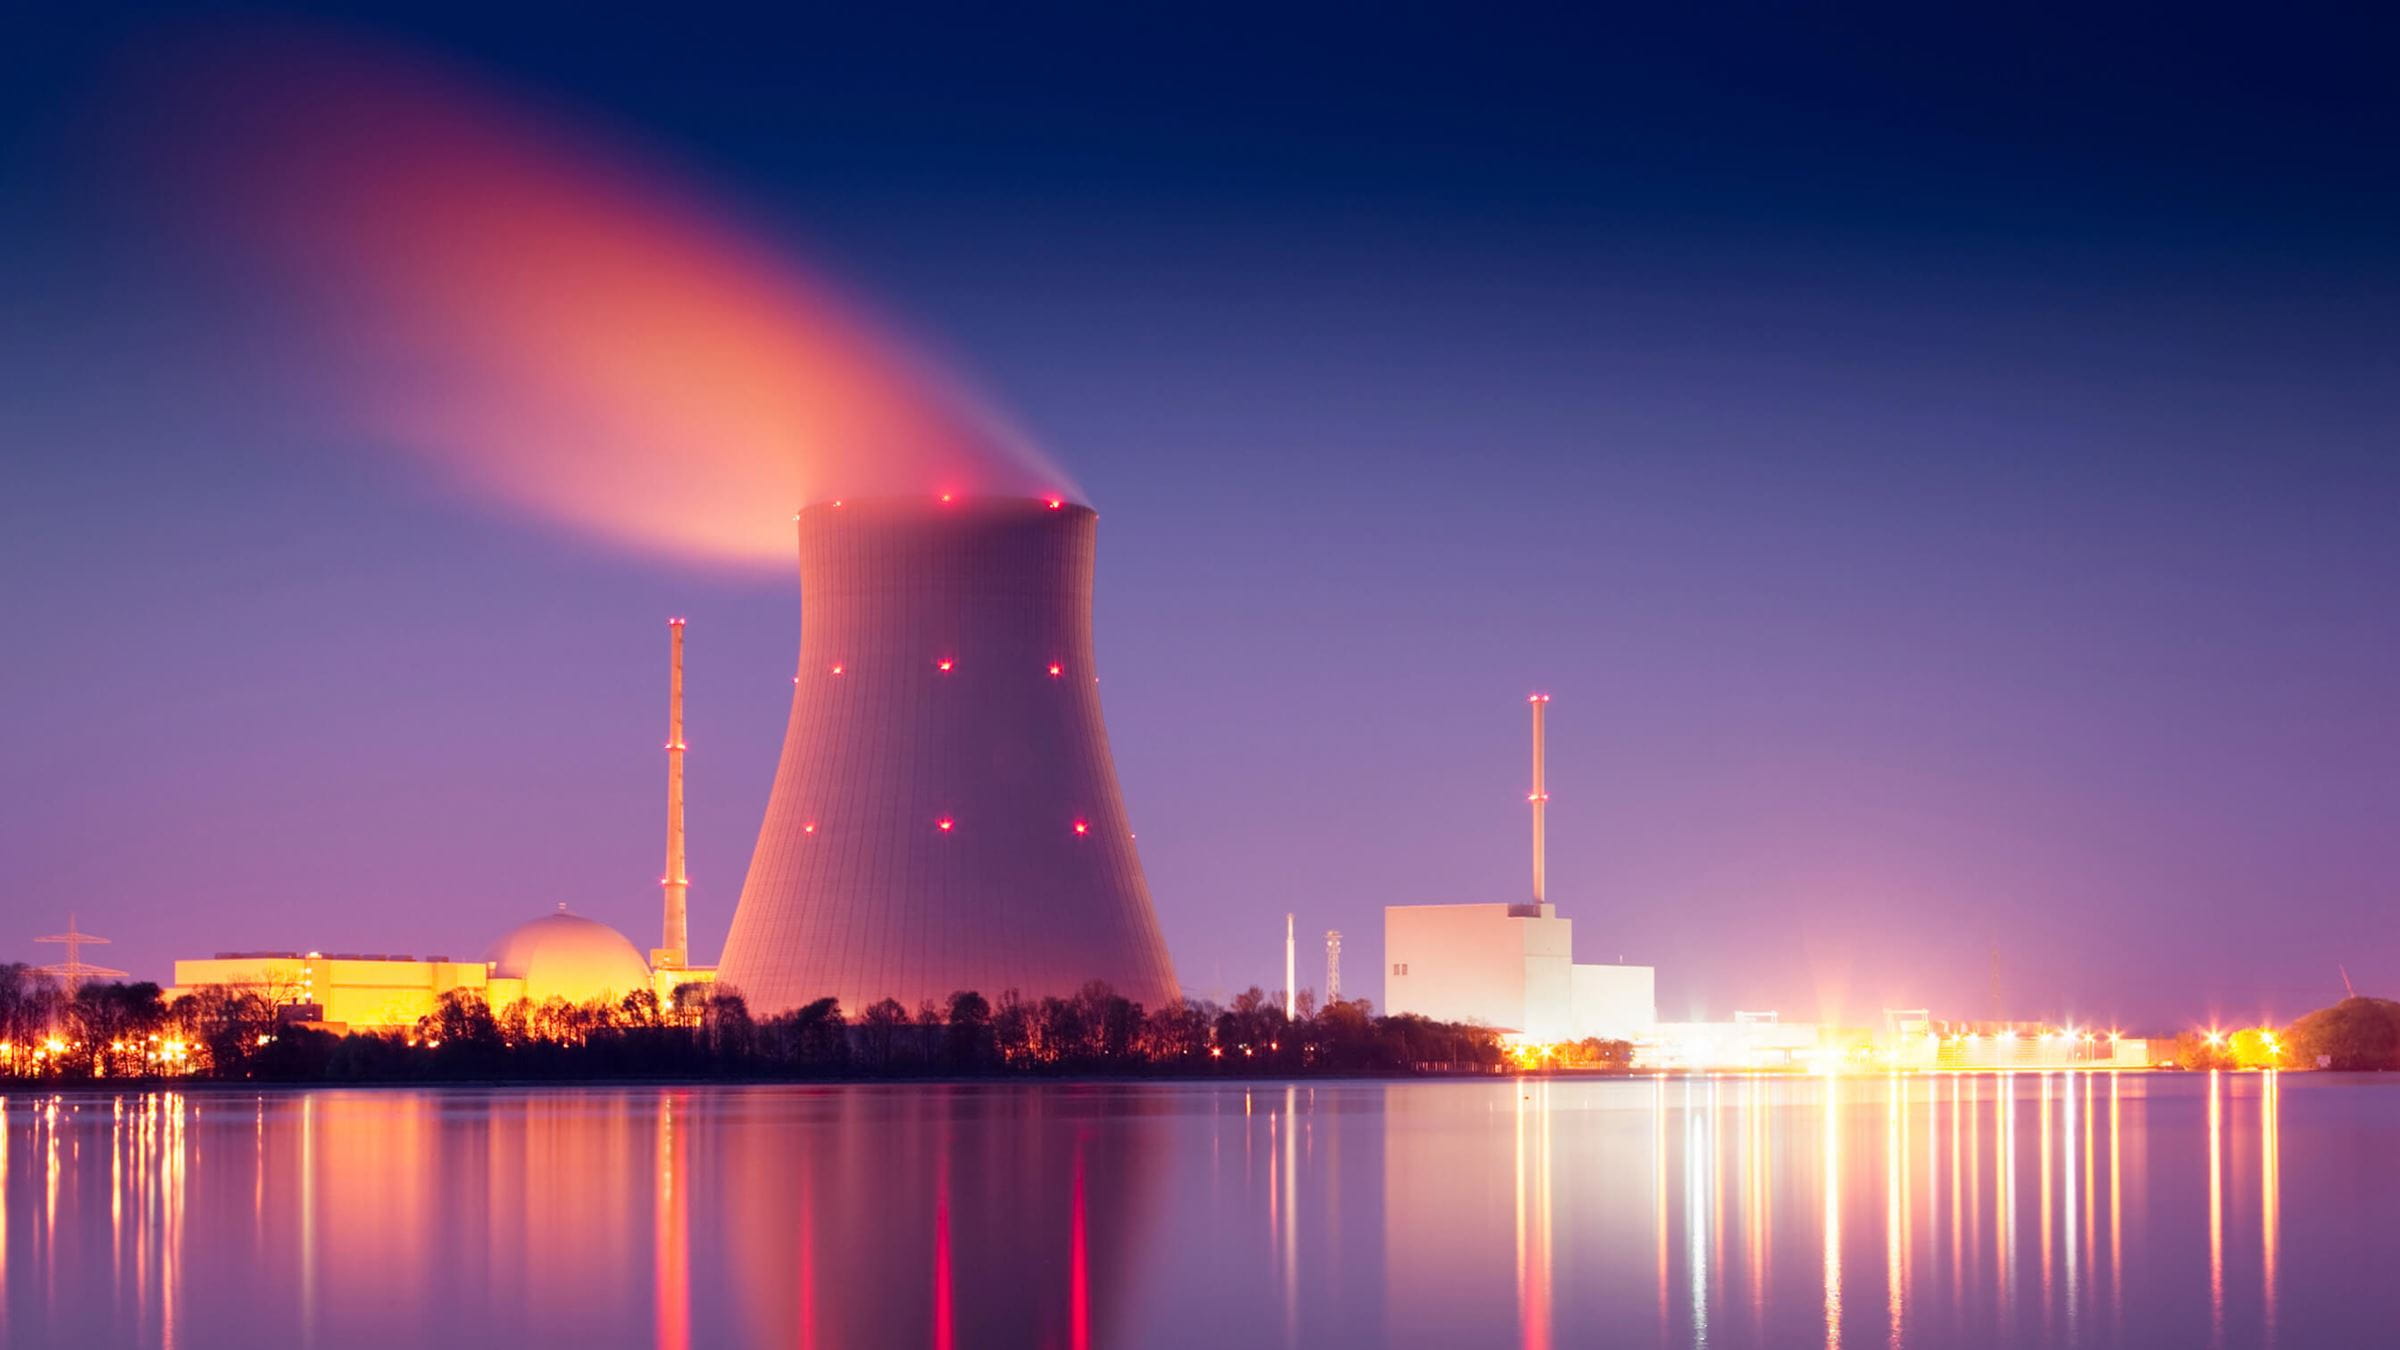 View across water to a nuclear power plant at night